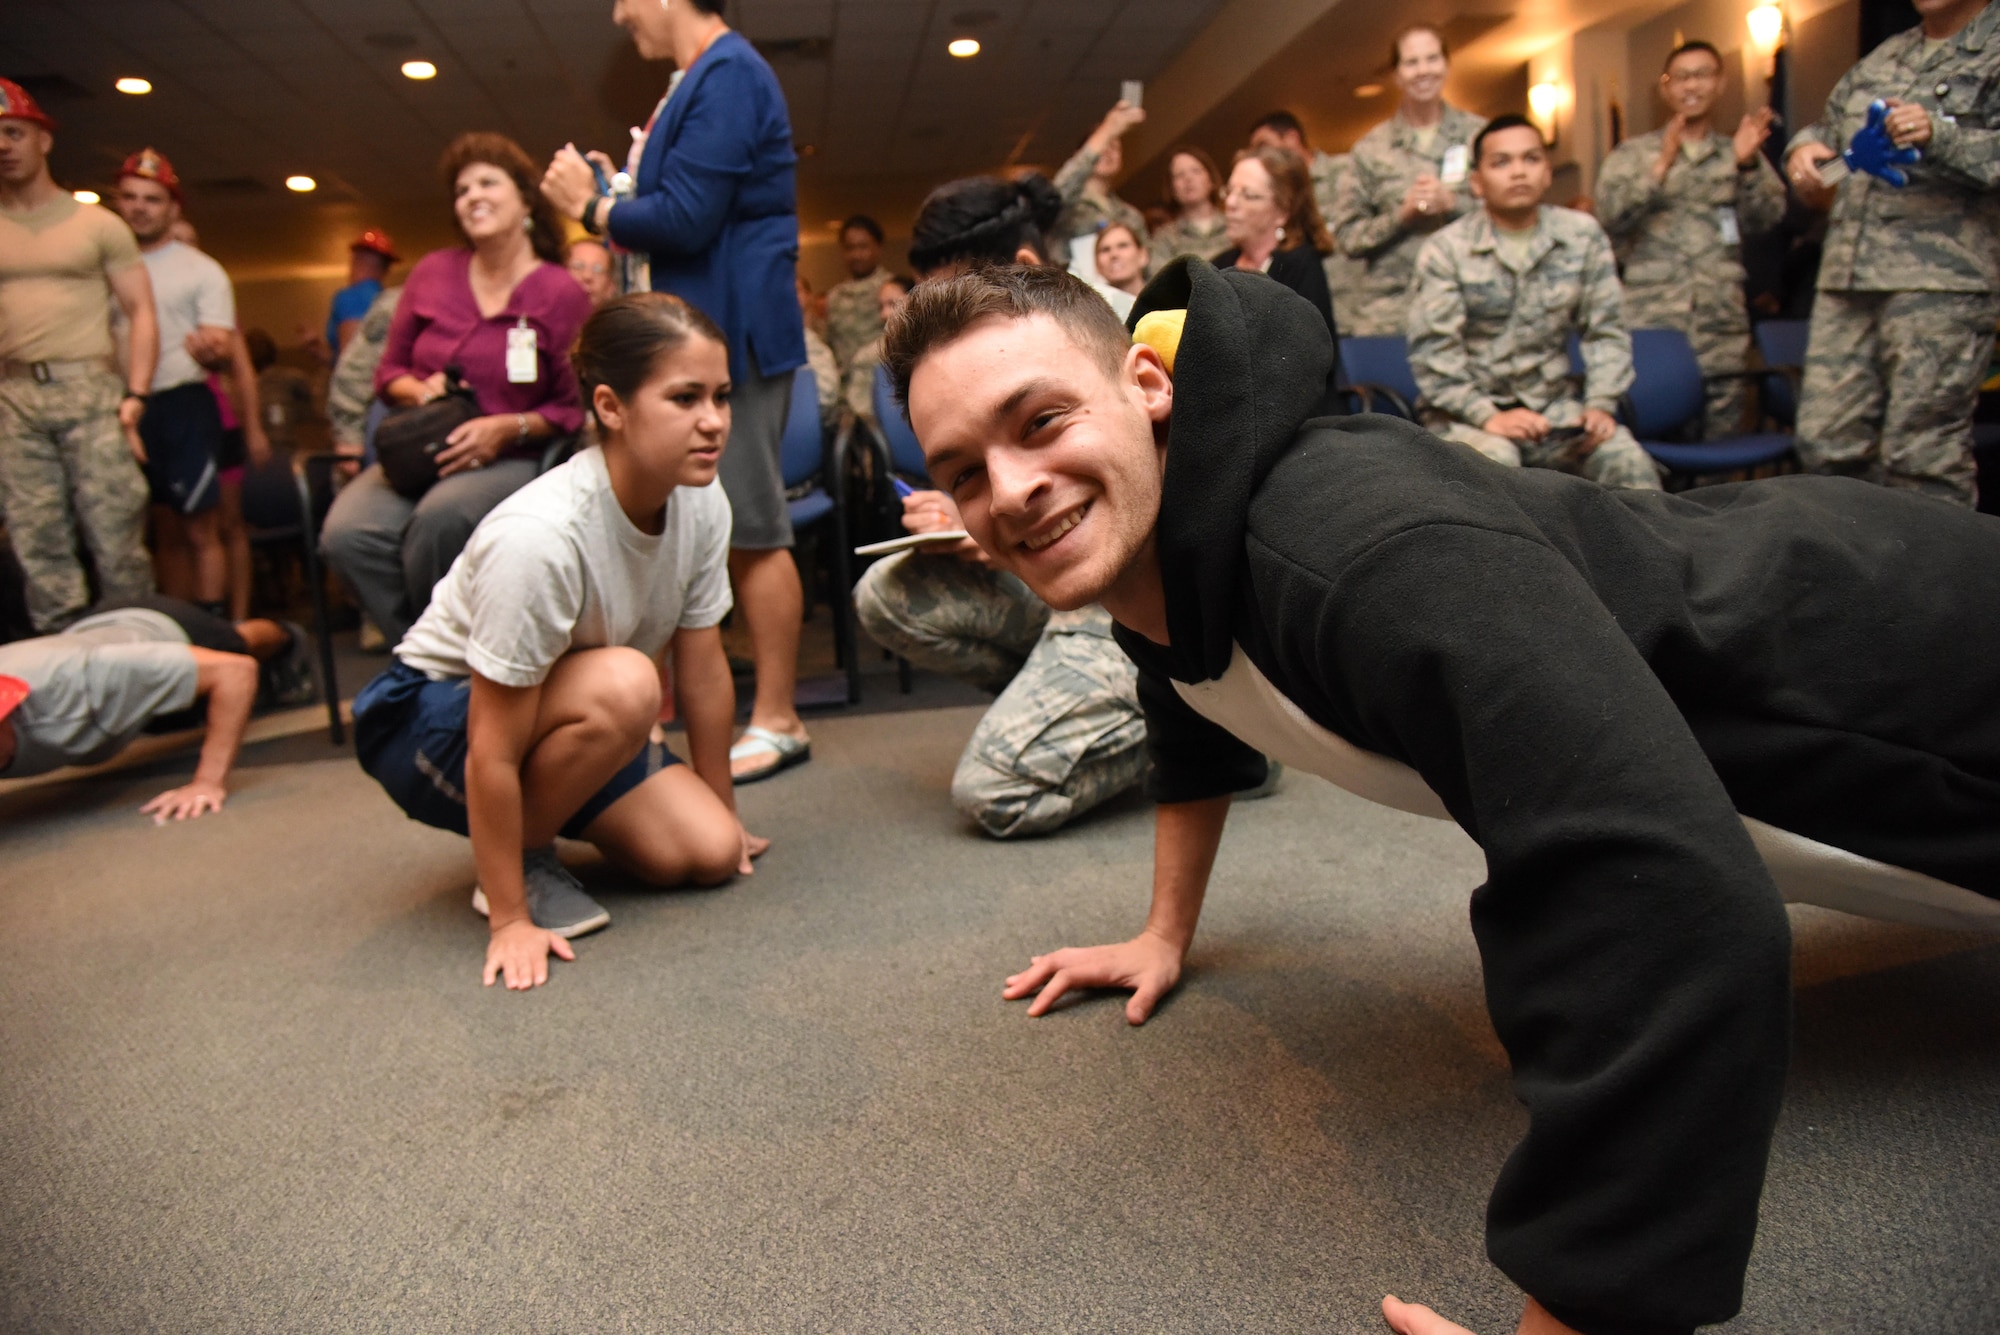 Airman 1st Class Garrett Redmond, 81st Diagnostic and Therapeutics Squadron radiology technician, smiles while doing push-ups during the 81st Medical Group Push-up Competition at the Keesler Medical Center Don Wylie Auditorium Nov. 1, 2016, on Keesler Air Force Base, Miss. Seven five-person teams competed in the event pushing out a total of 6,272 push-ups. The 81st Dental Squadron was this year’s winner with 1,127 push-ups. The Airmen who participated in the event raised money to support the Krewe of Medics Mardi Gras Ball. (U.S. Air Force photo by Kemberly Groue/Released)
